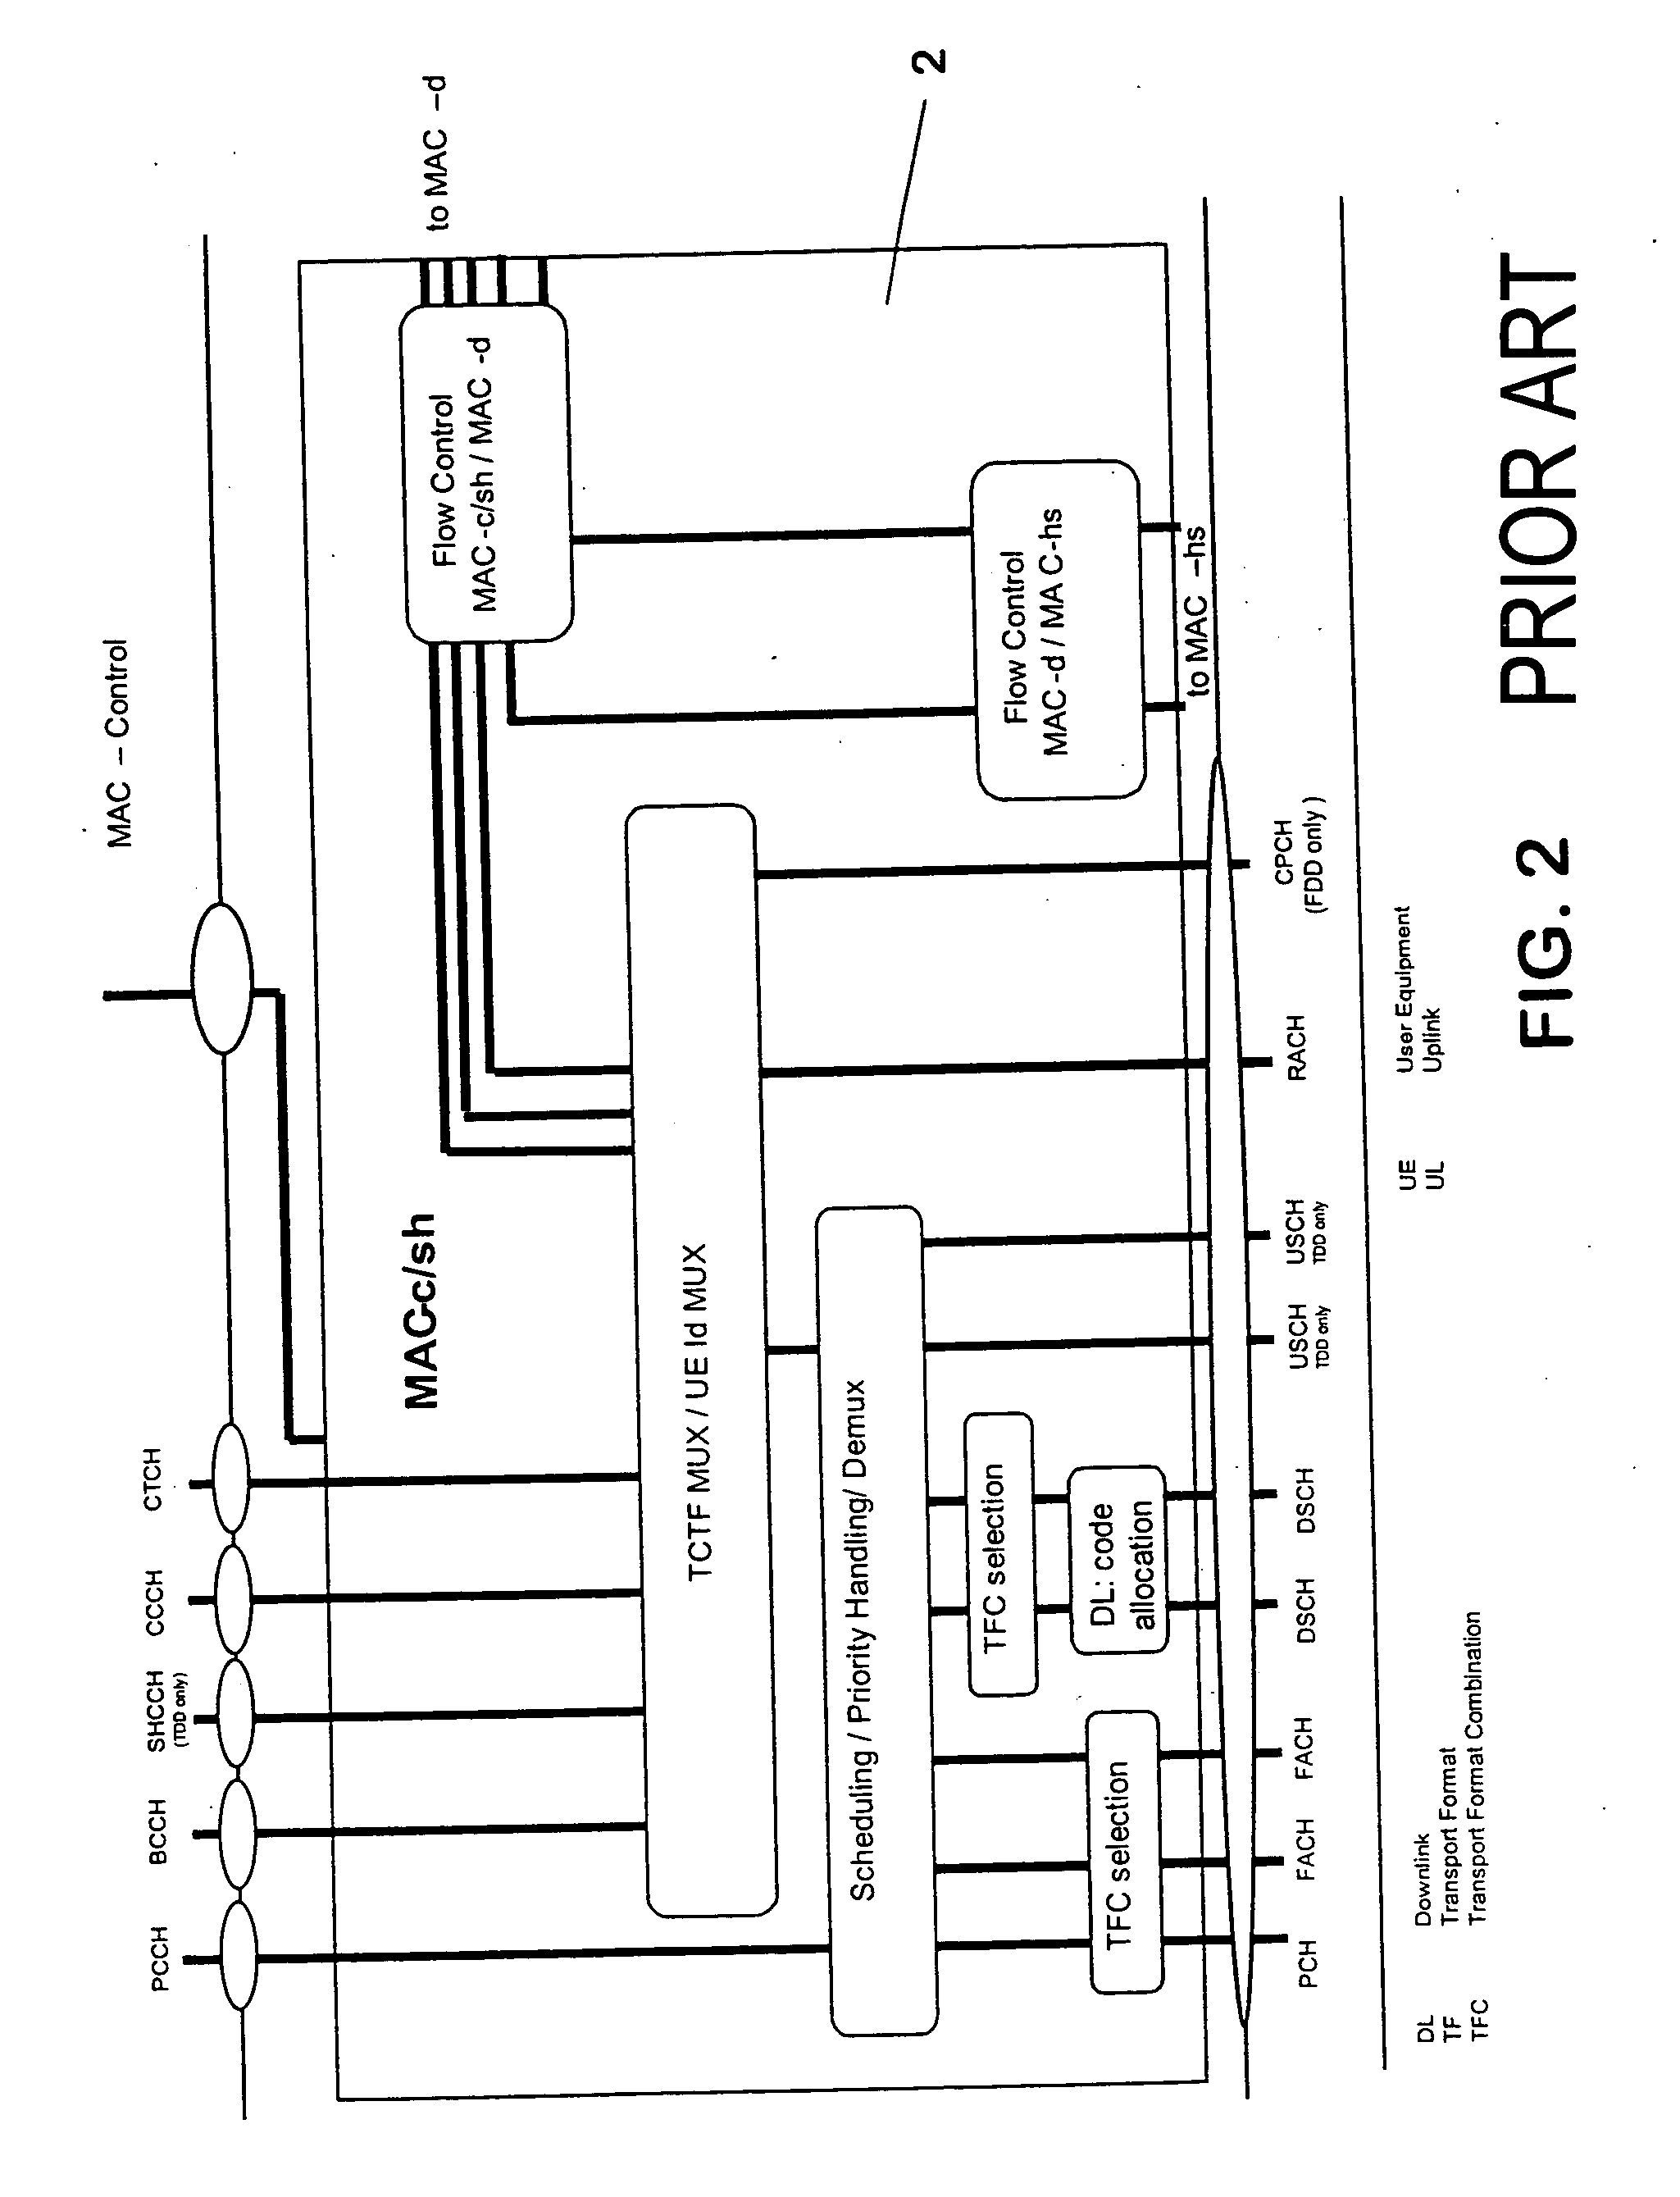 Transmission of data within a communications network